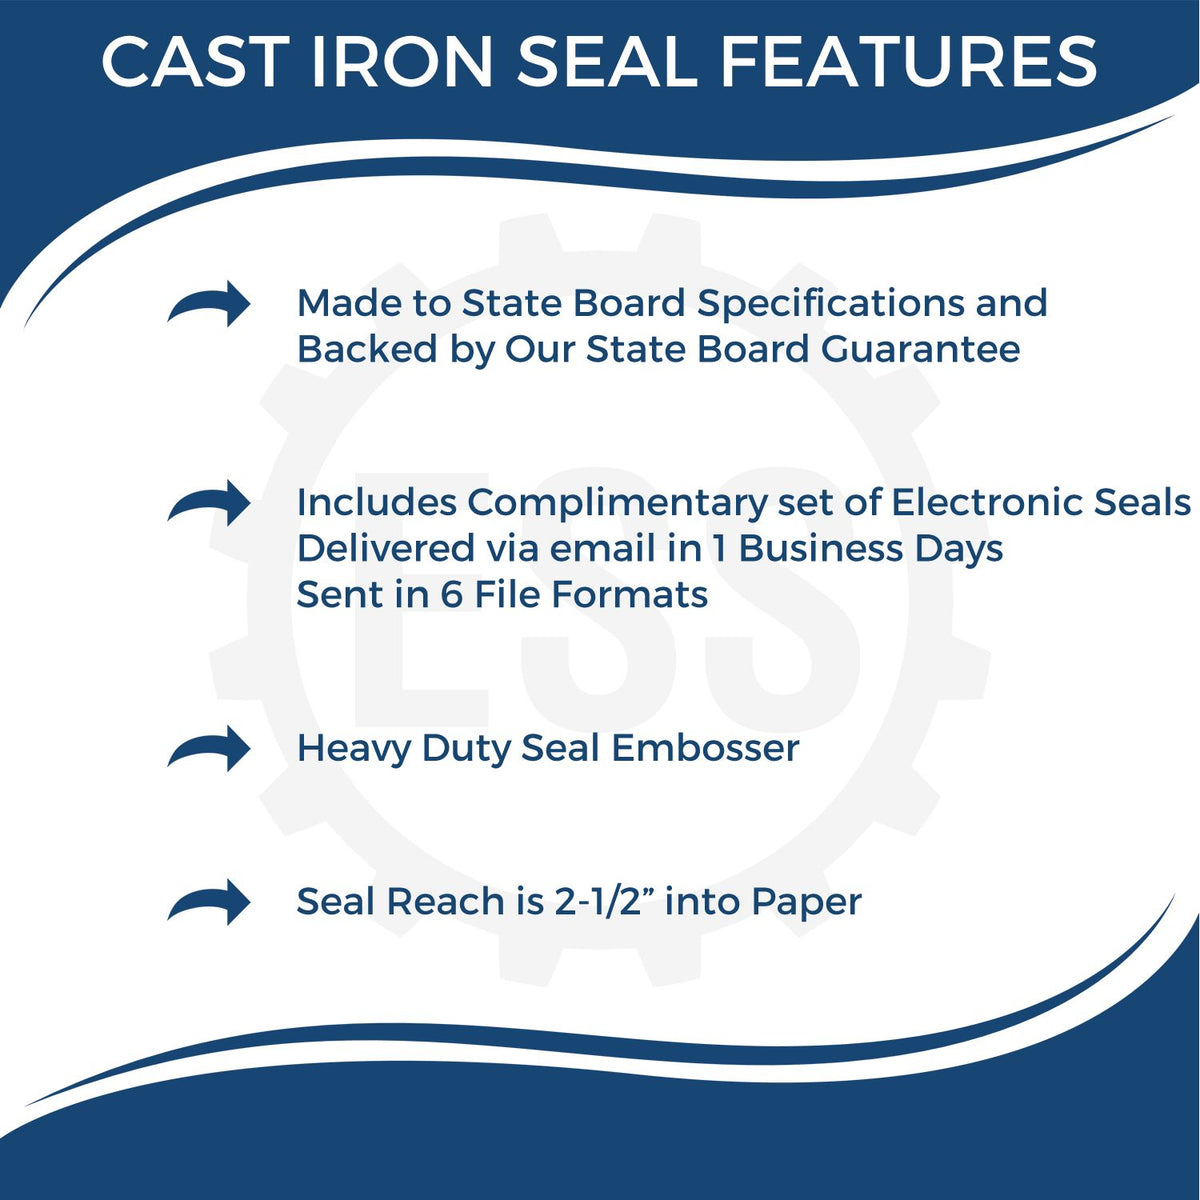 A picture of an infographic highlighting the selling points for the Heavy Duty Cast Iron Delaware Engineer Seal Embosser